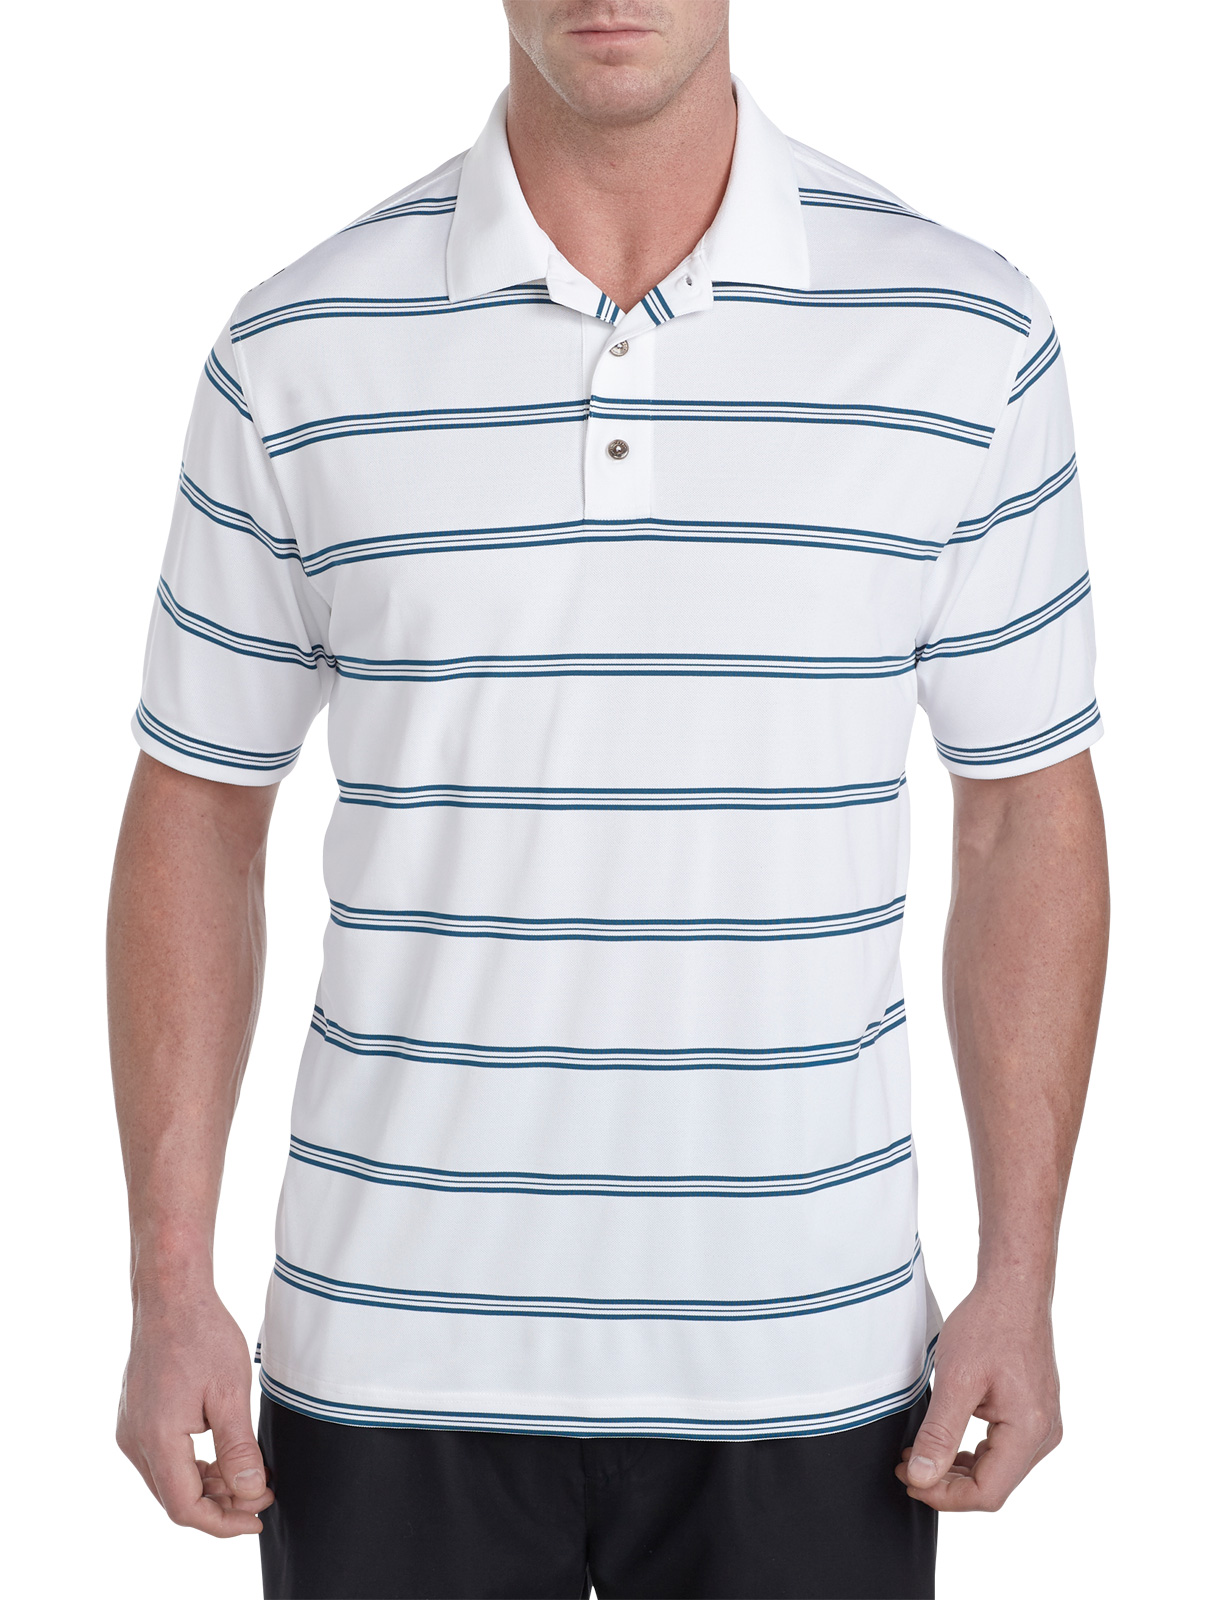 Reebok Men's Big and Tall Wide-Stripe PlayDry Pique Polo